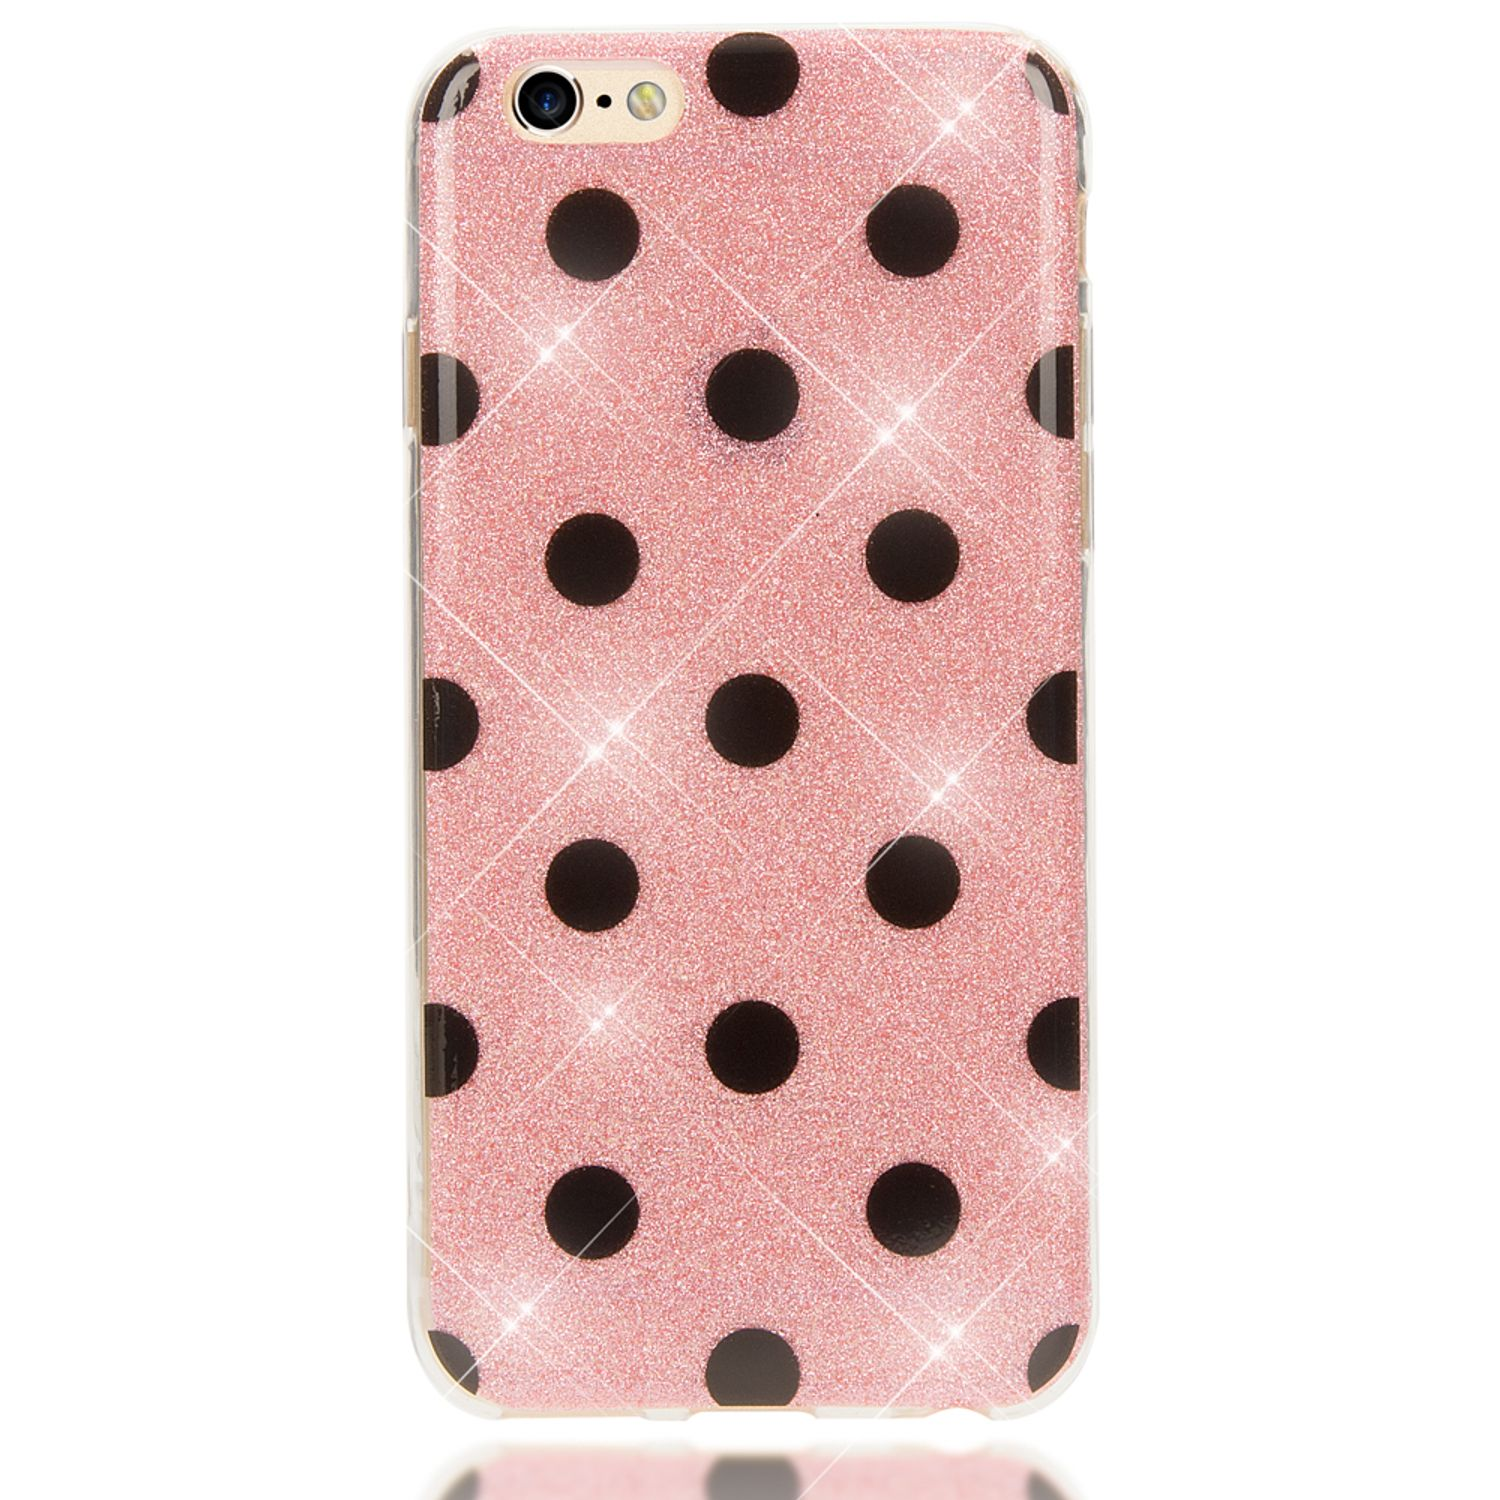 Backcover, Apple, iPhone Punkte NALIA iPhone 6s, Rosa 6 Hülle,